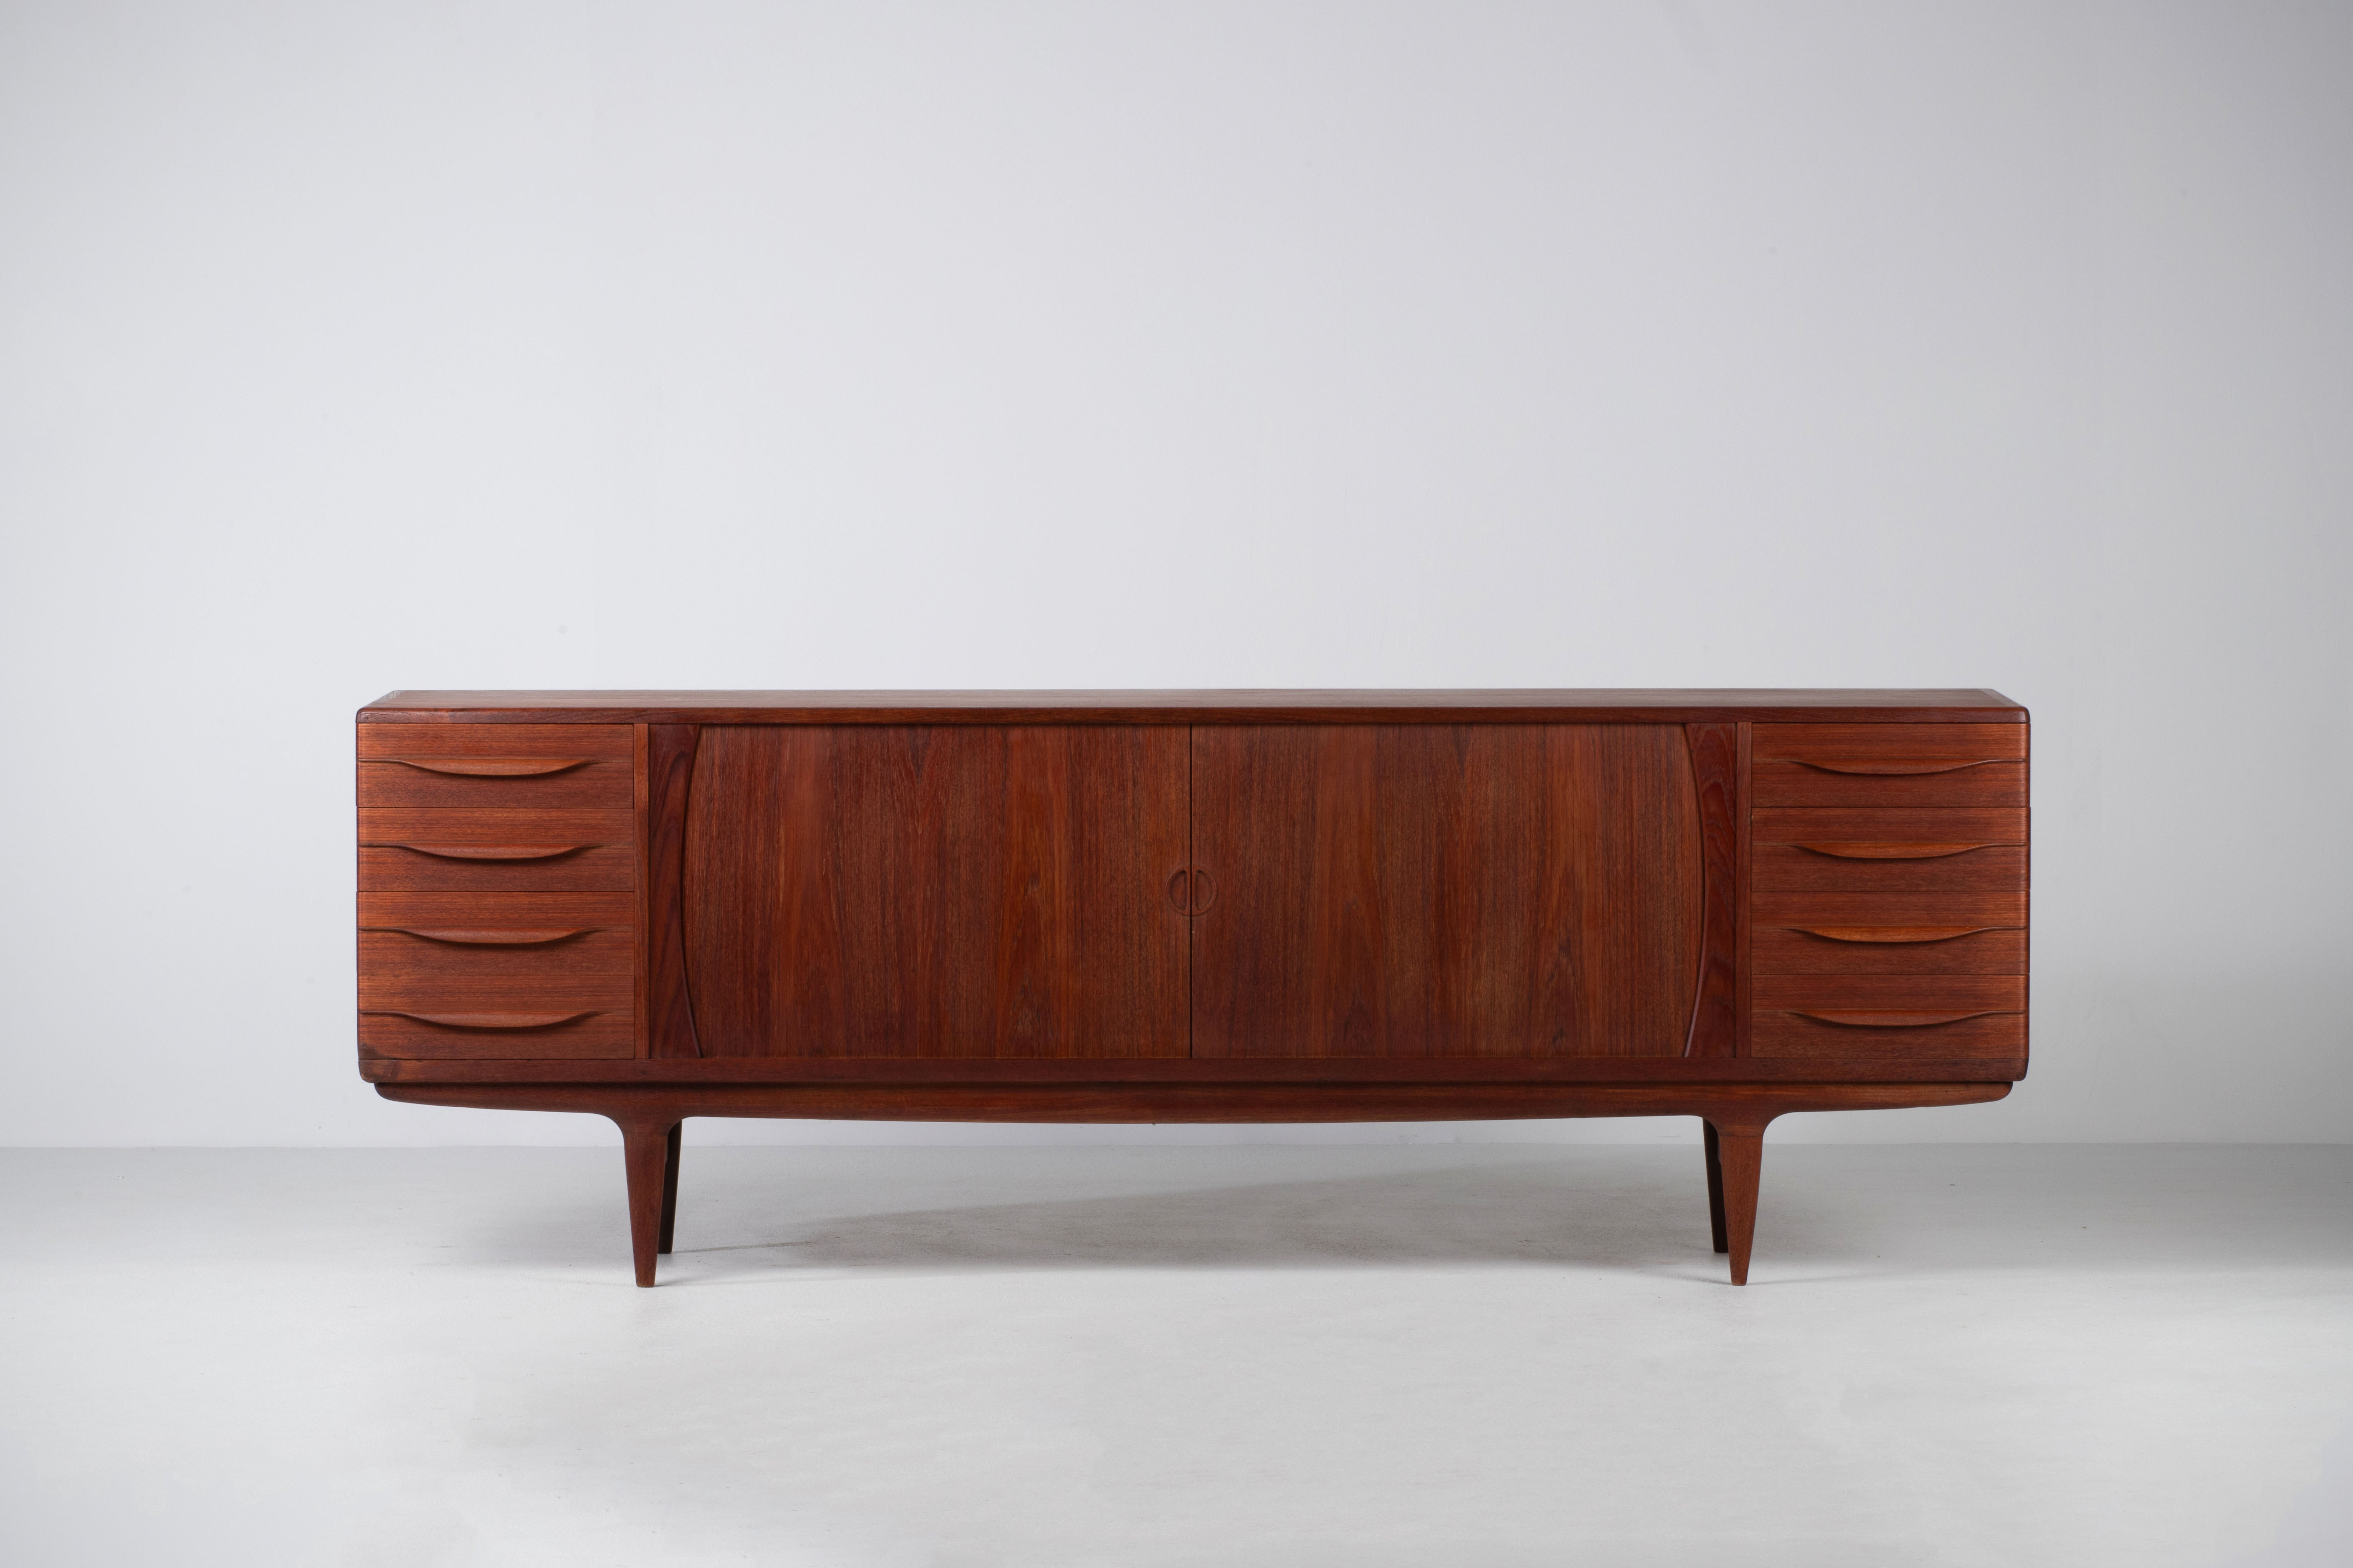 Sublime Danish teak sideboard by the famous designer Johannes Andersen for SAMCOM.
Composed of two times four drawers on the sides and two large curtain doors which open onto 4 height-adjustable shelves.
Good quality of manufacture and finish. A